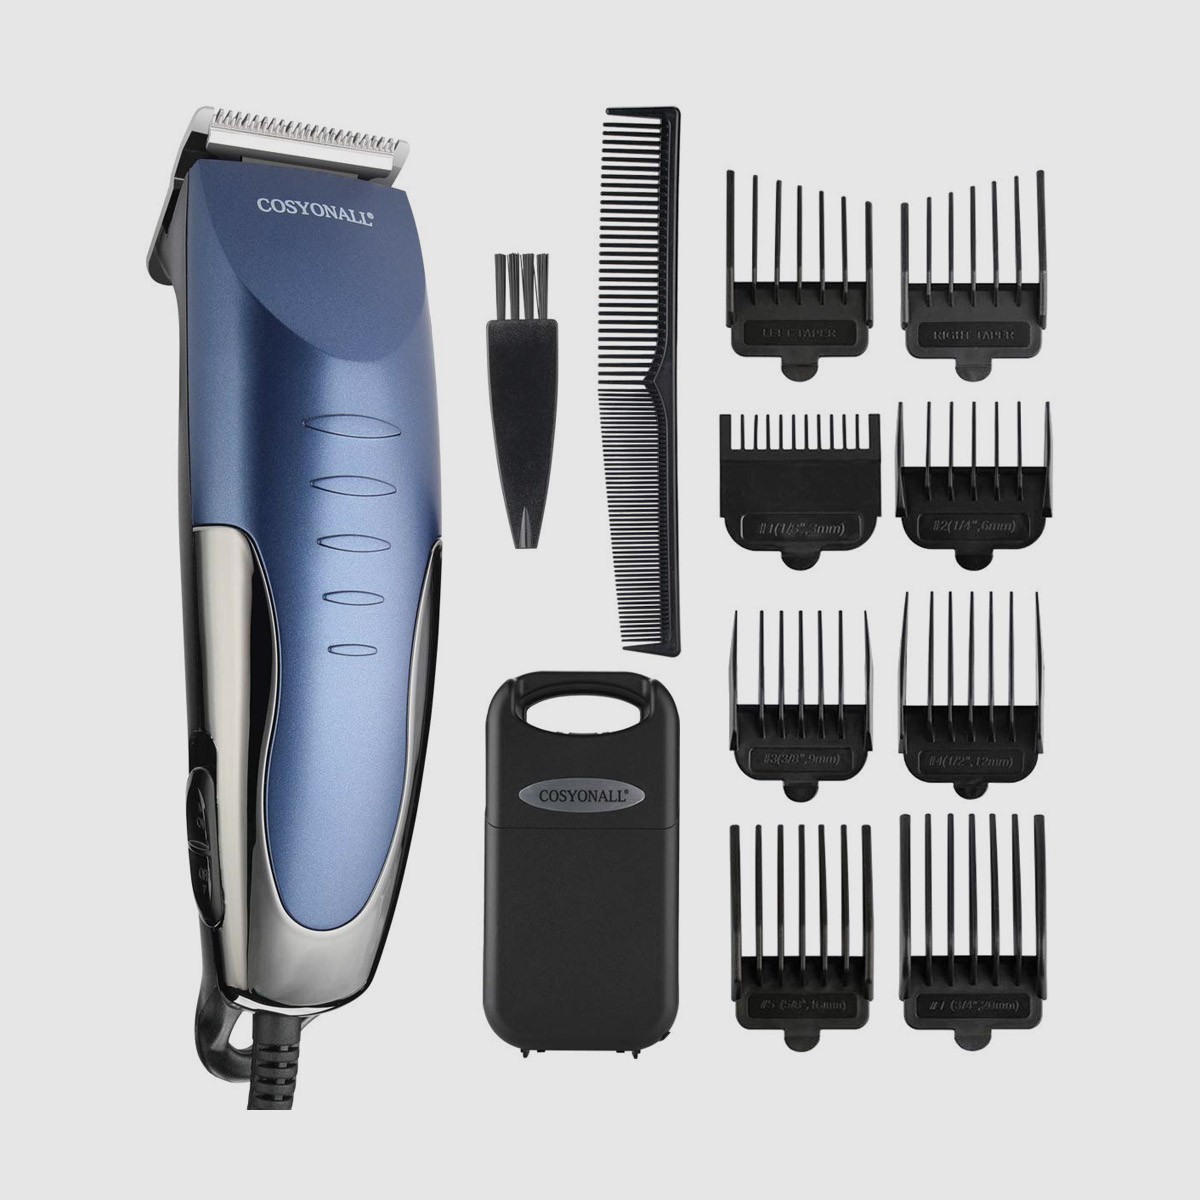 Pro Corded Hair Trimmer Cutting Kit - 0